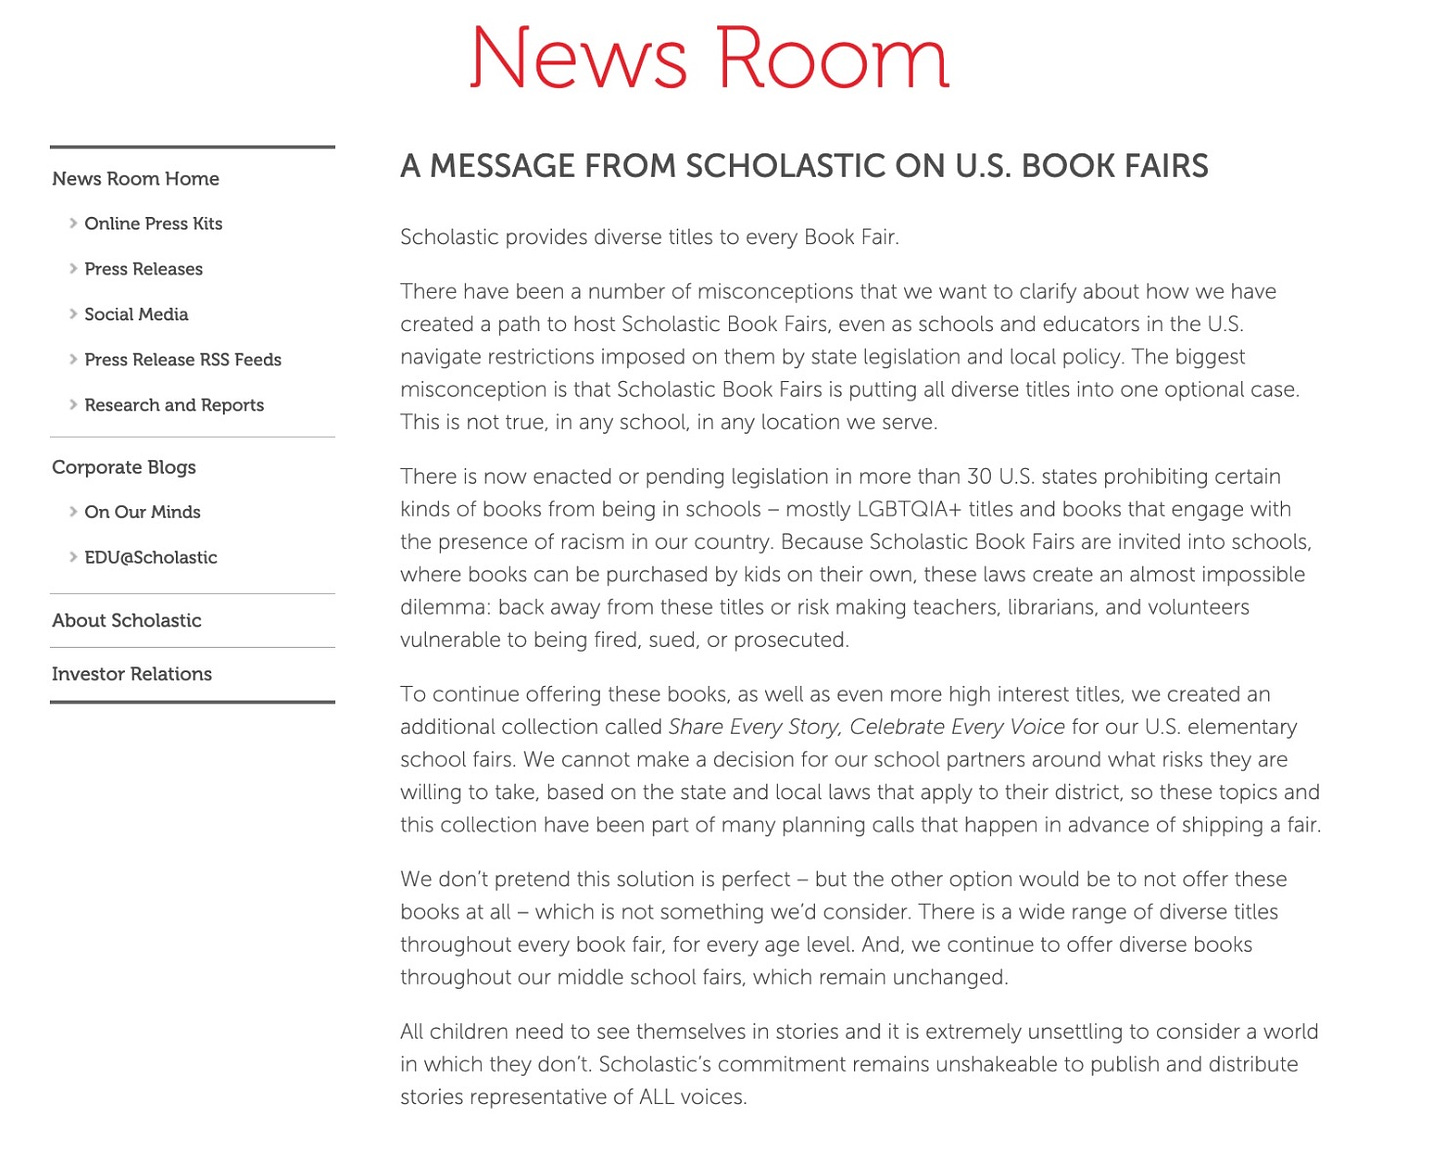 scholastic message posted about the diverse book case at book fairs.